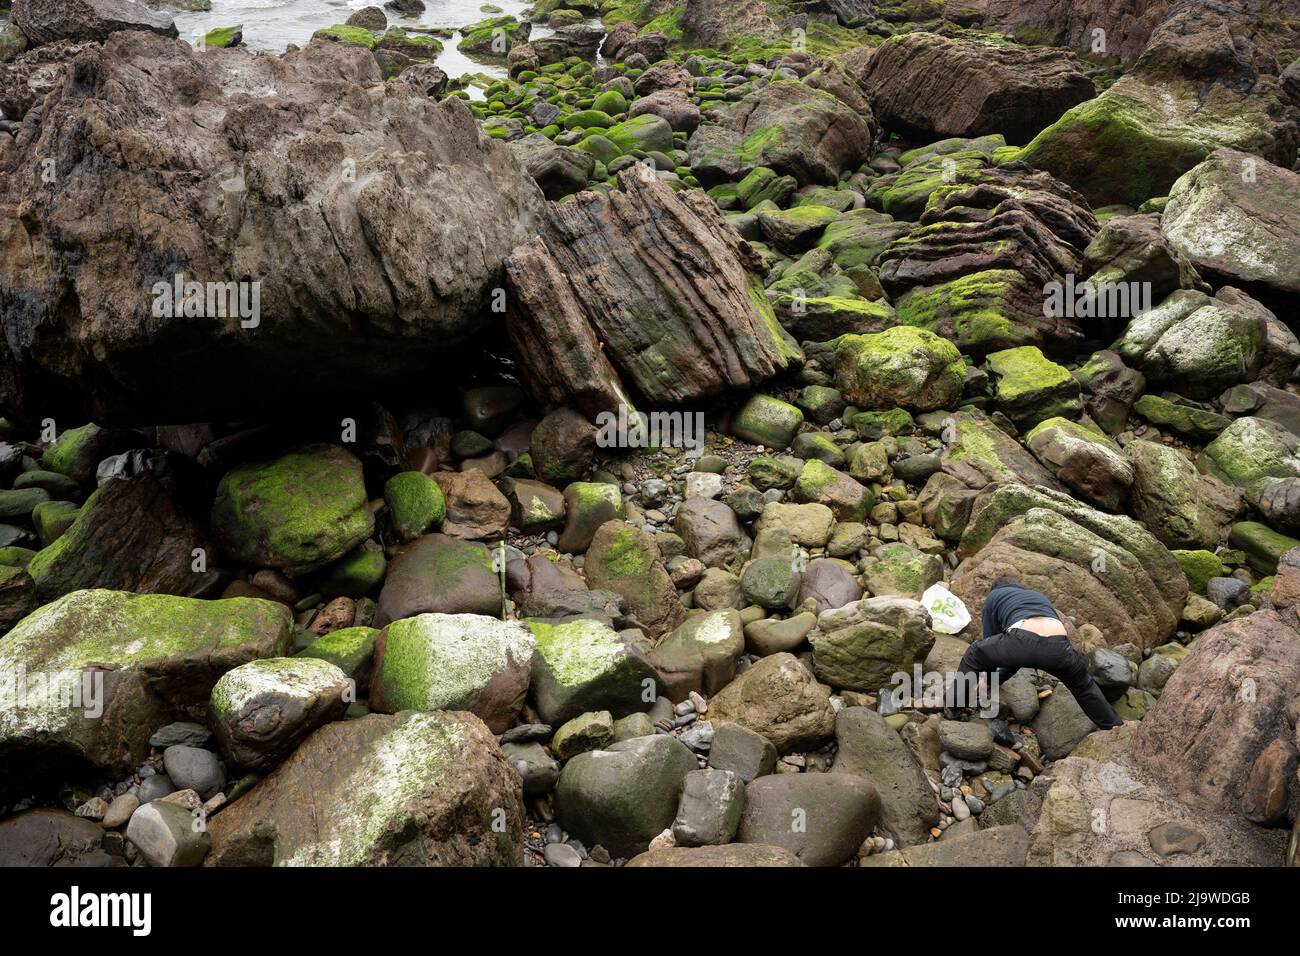 A man hunts for crabs in rockpool strata of Jurassic rock on the Asturias Dinosaur coast, on 14th May 2022, in Ribadesella, Asturias, Spain. Stock Photo